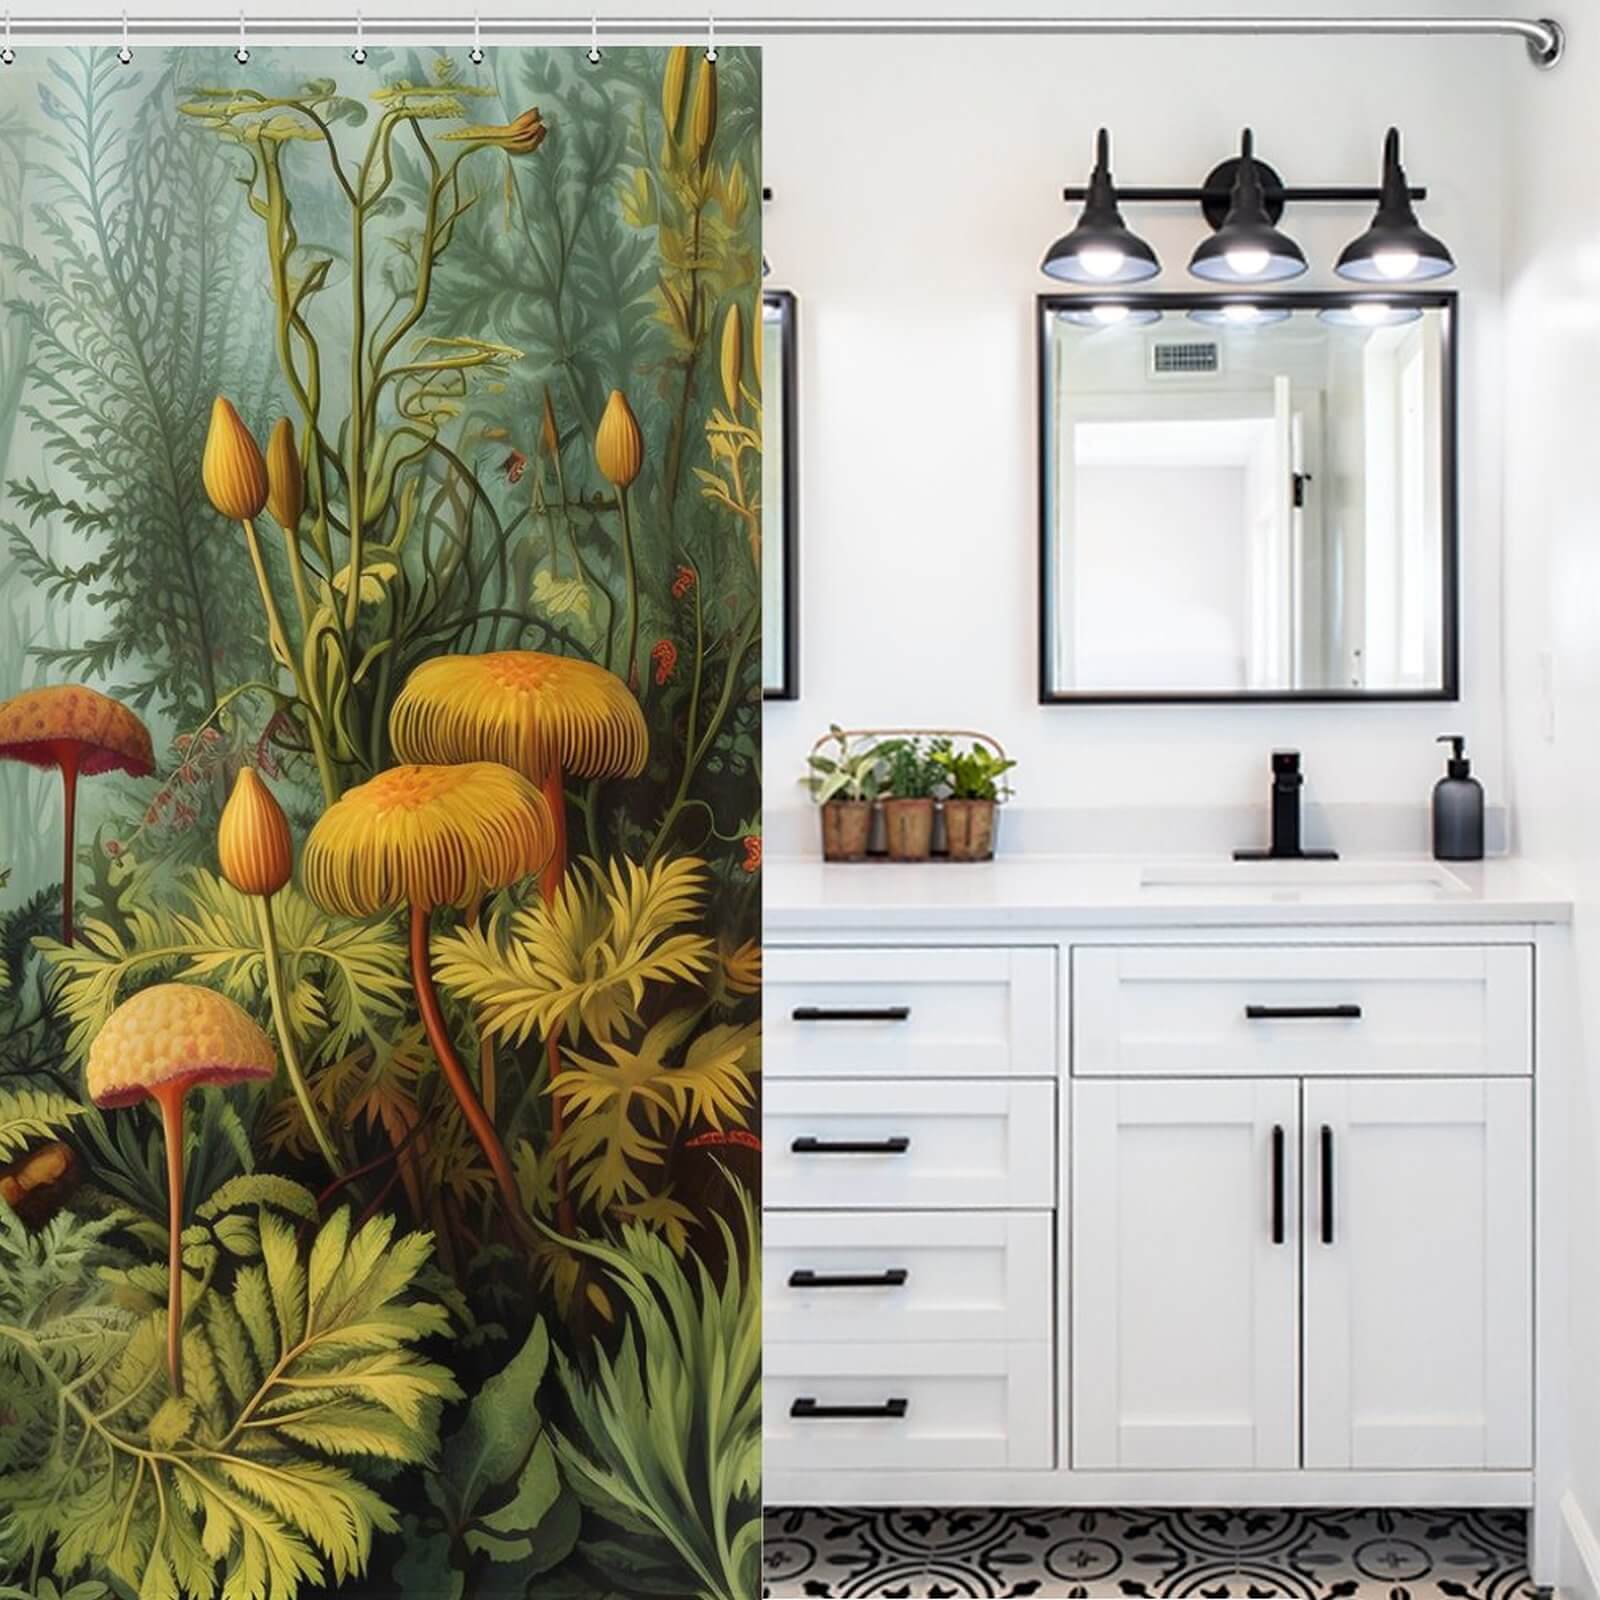 A Mushroom Jungle Shower Curtain-Cottoncat by Cotton Cat featuring a painting of mushrooms.